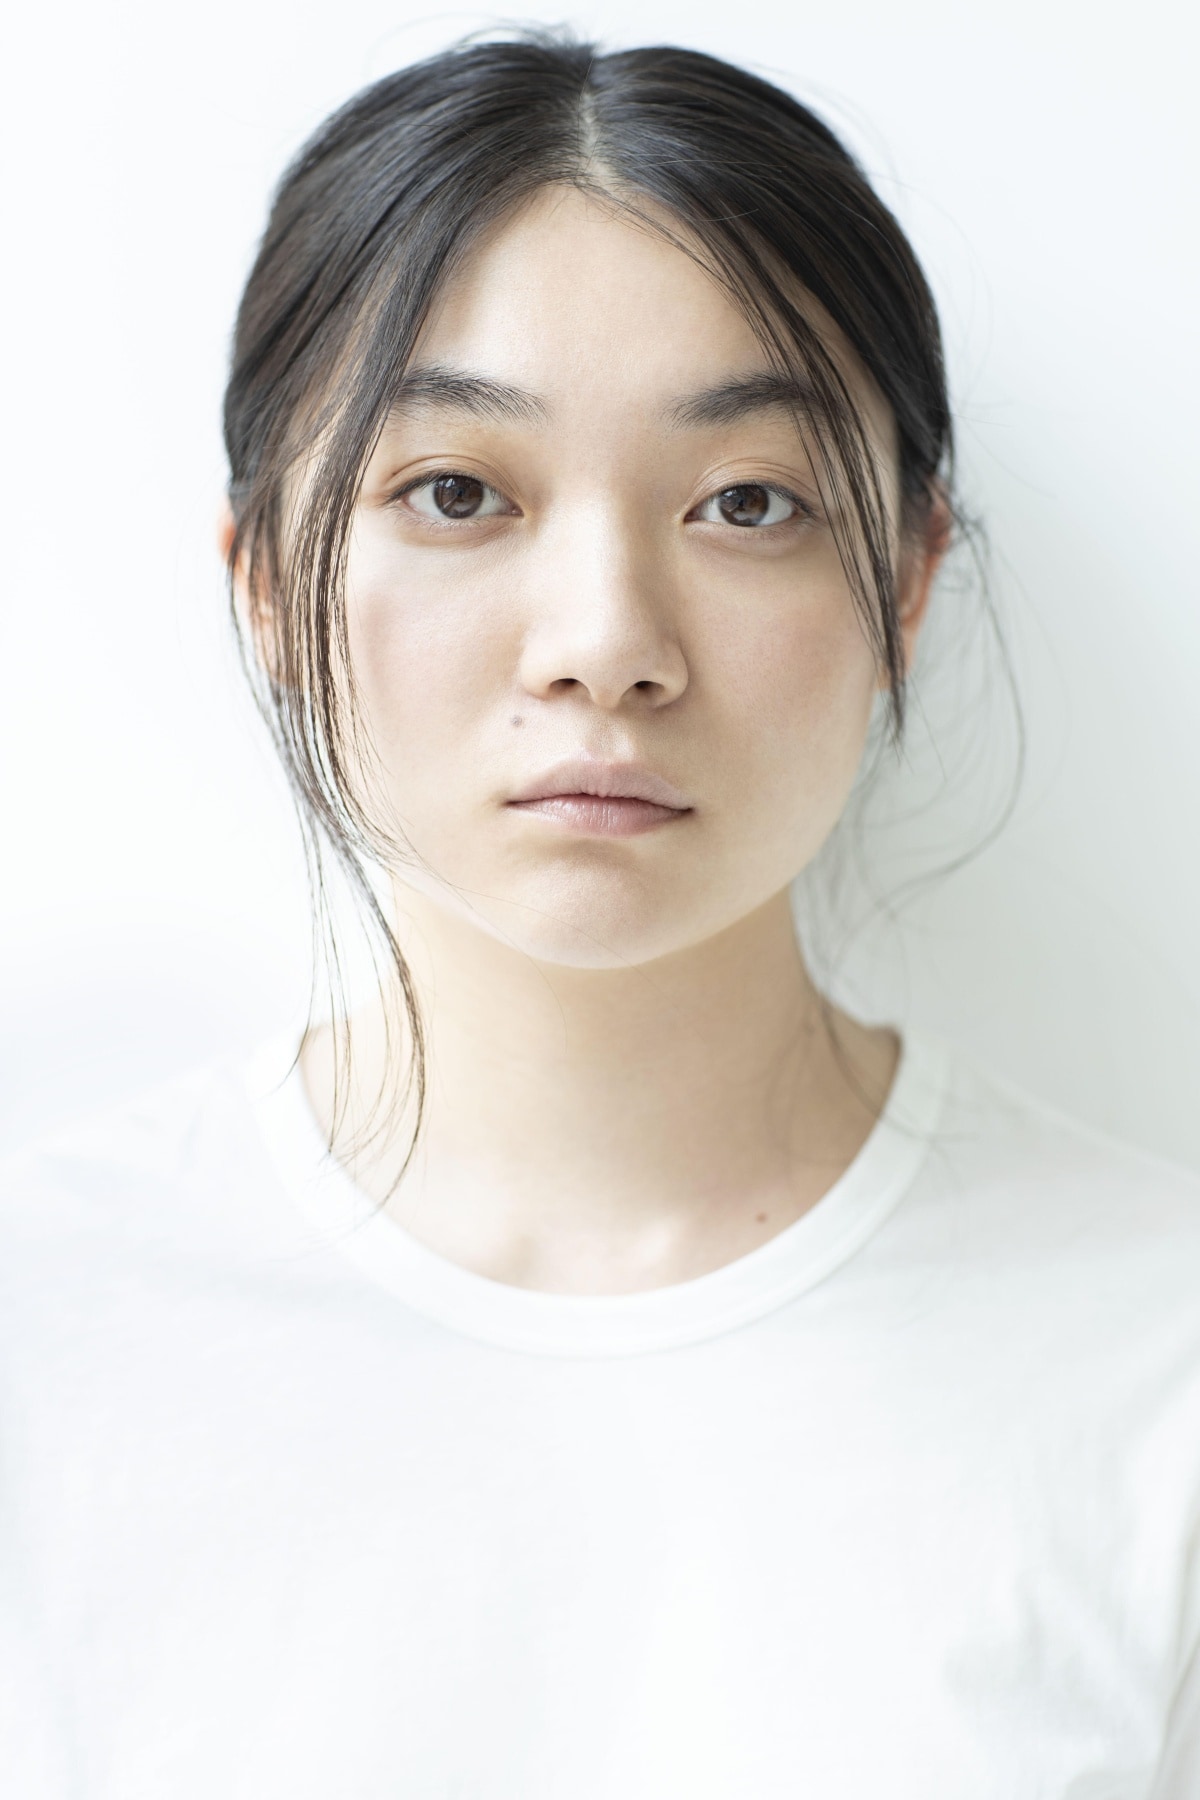 Miura Toko: On the Road to Acting Success